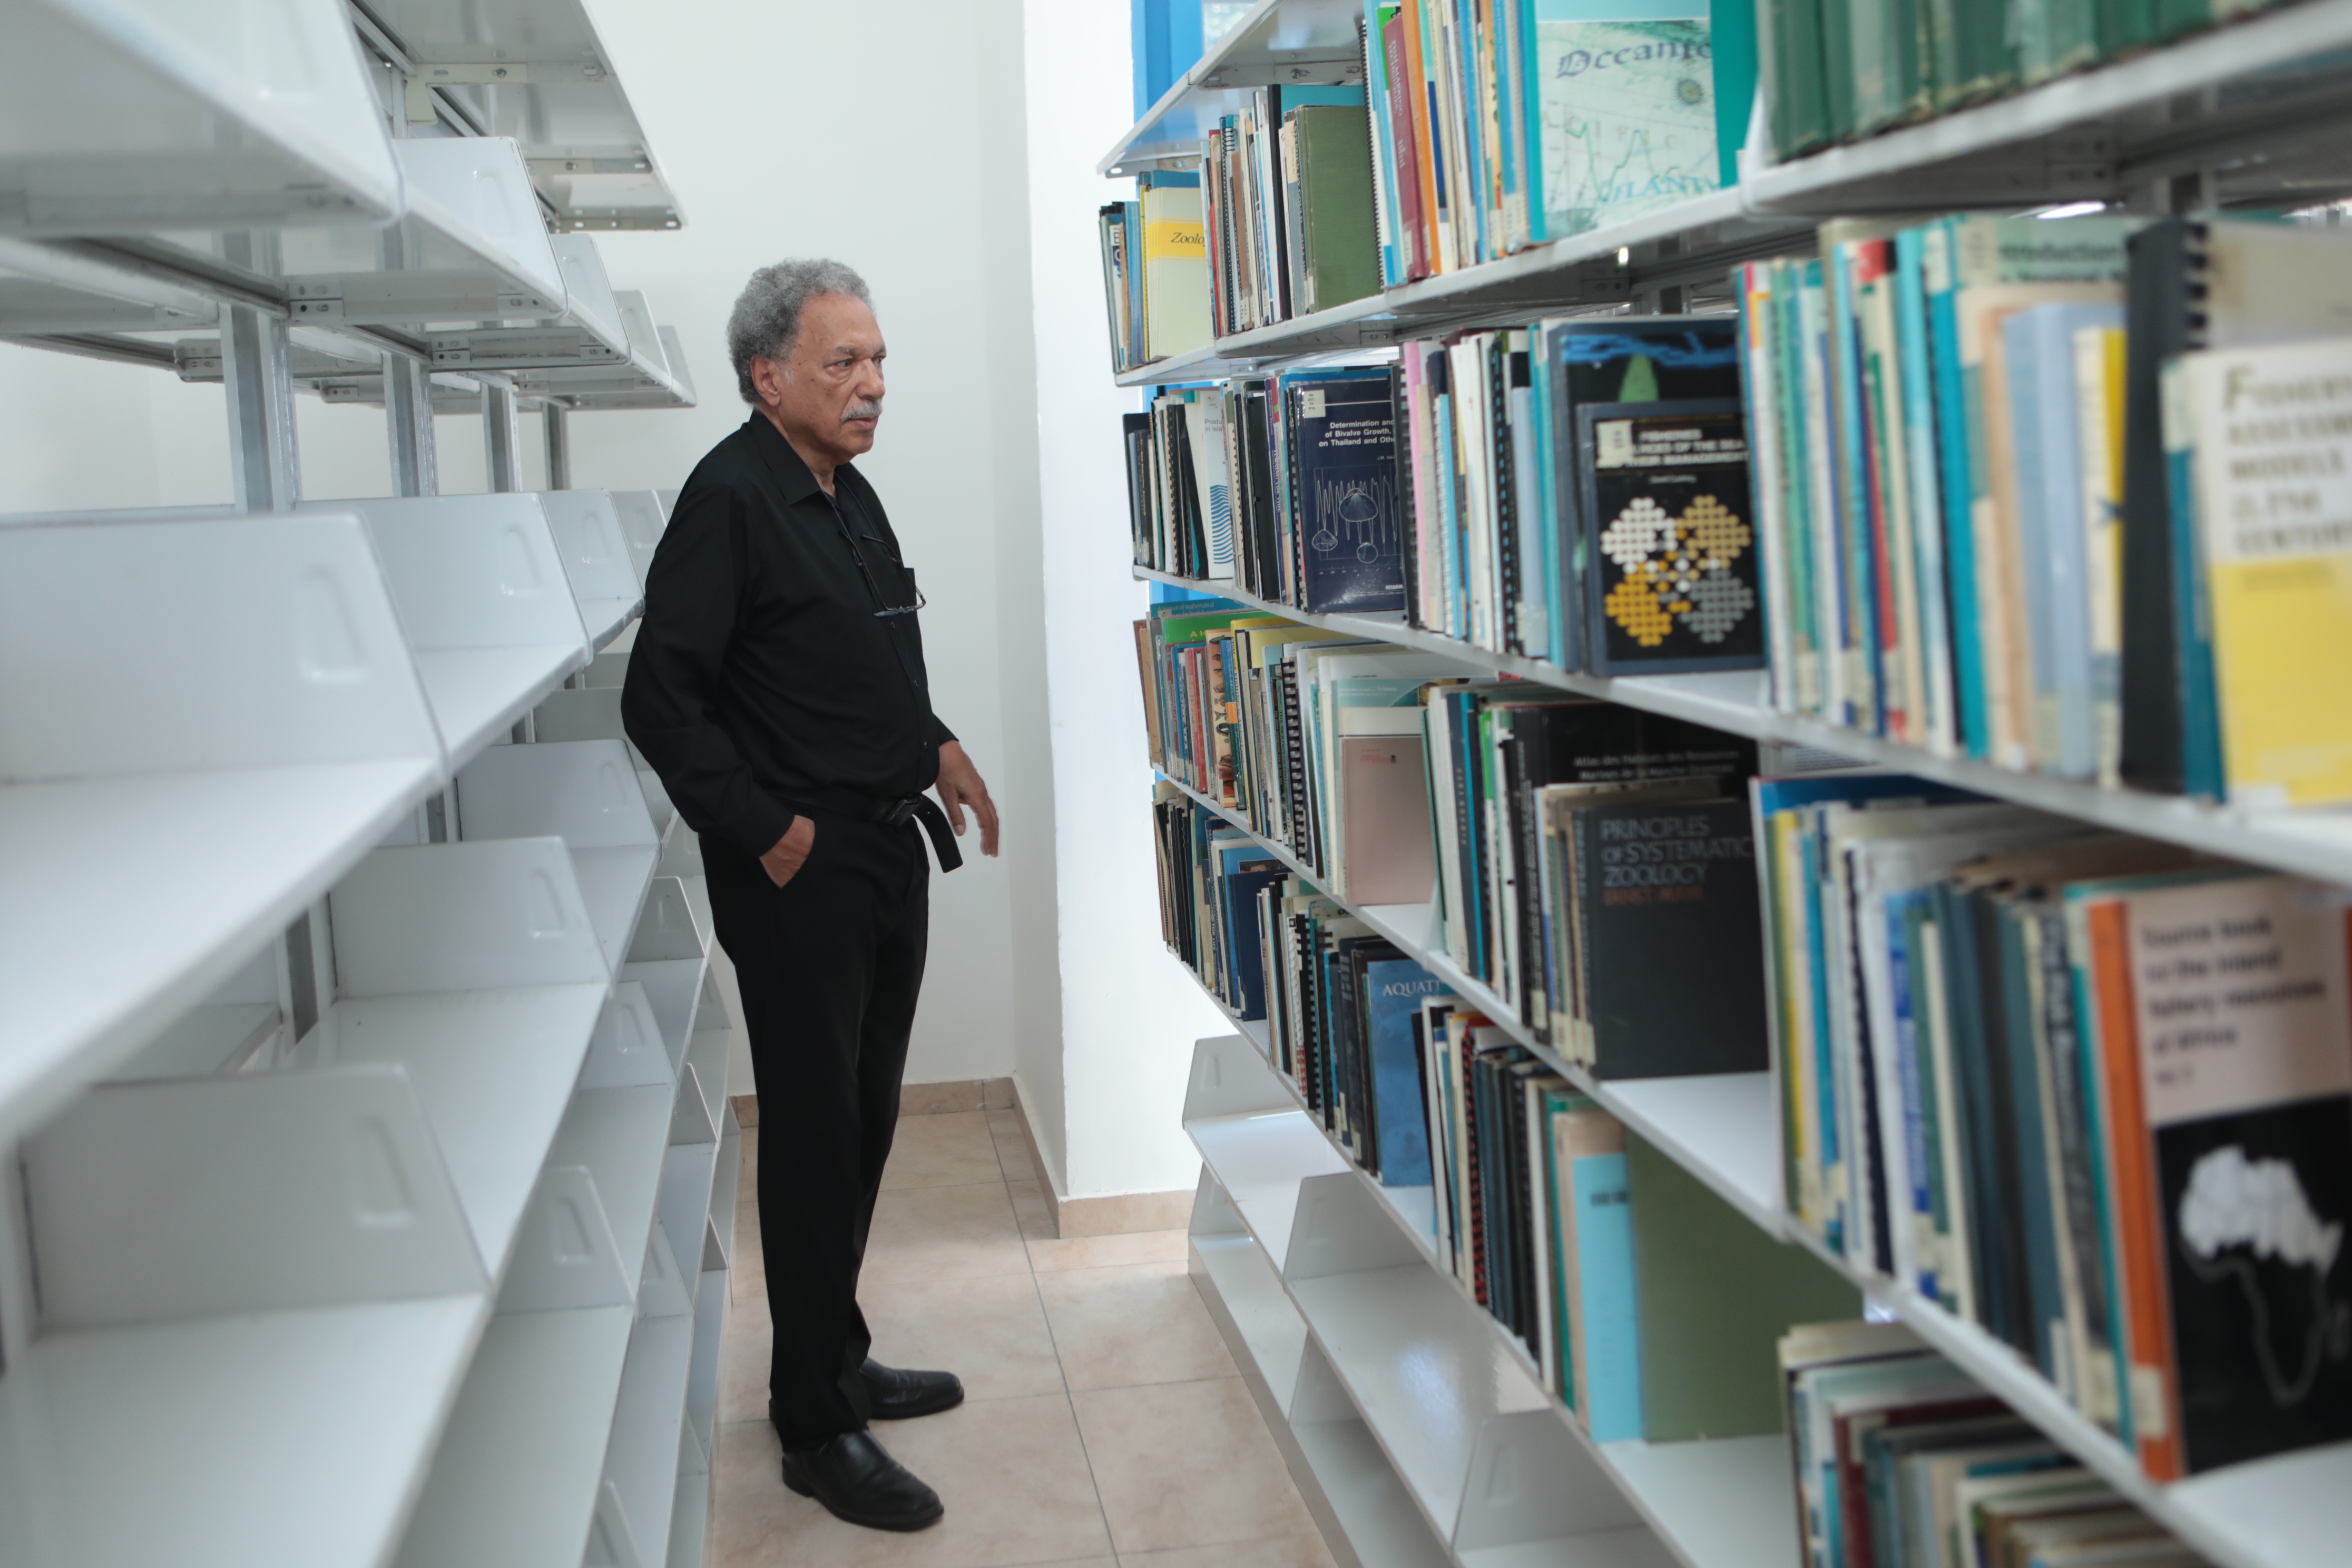 Professor Daniel Pauly Having a Glimpse at the Library Shelves